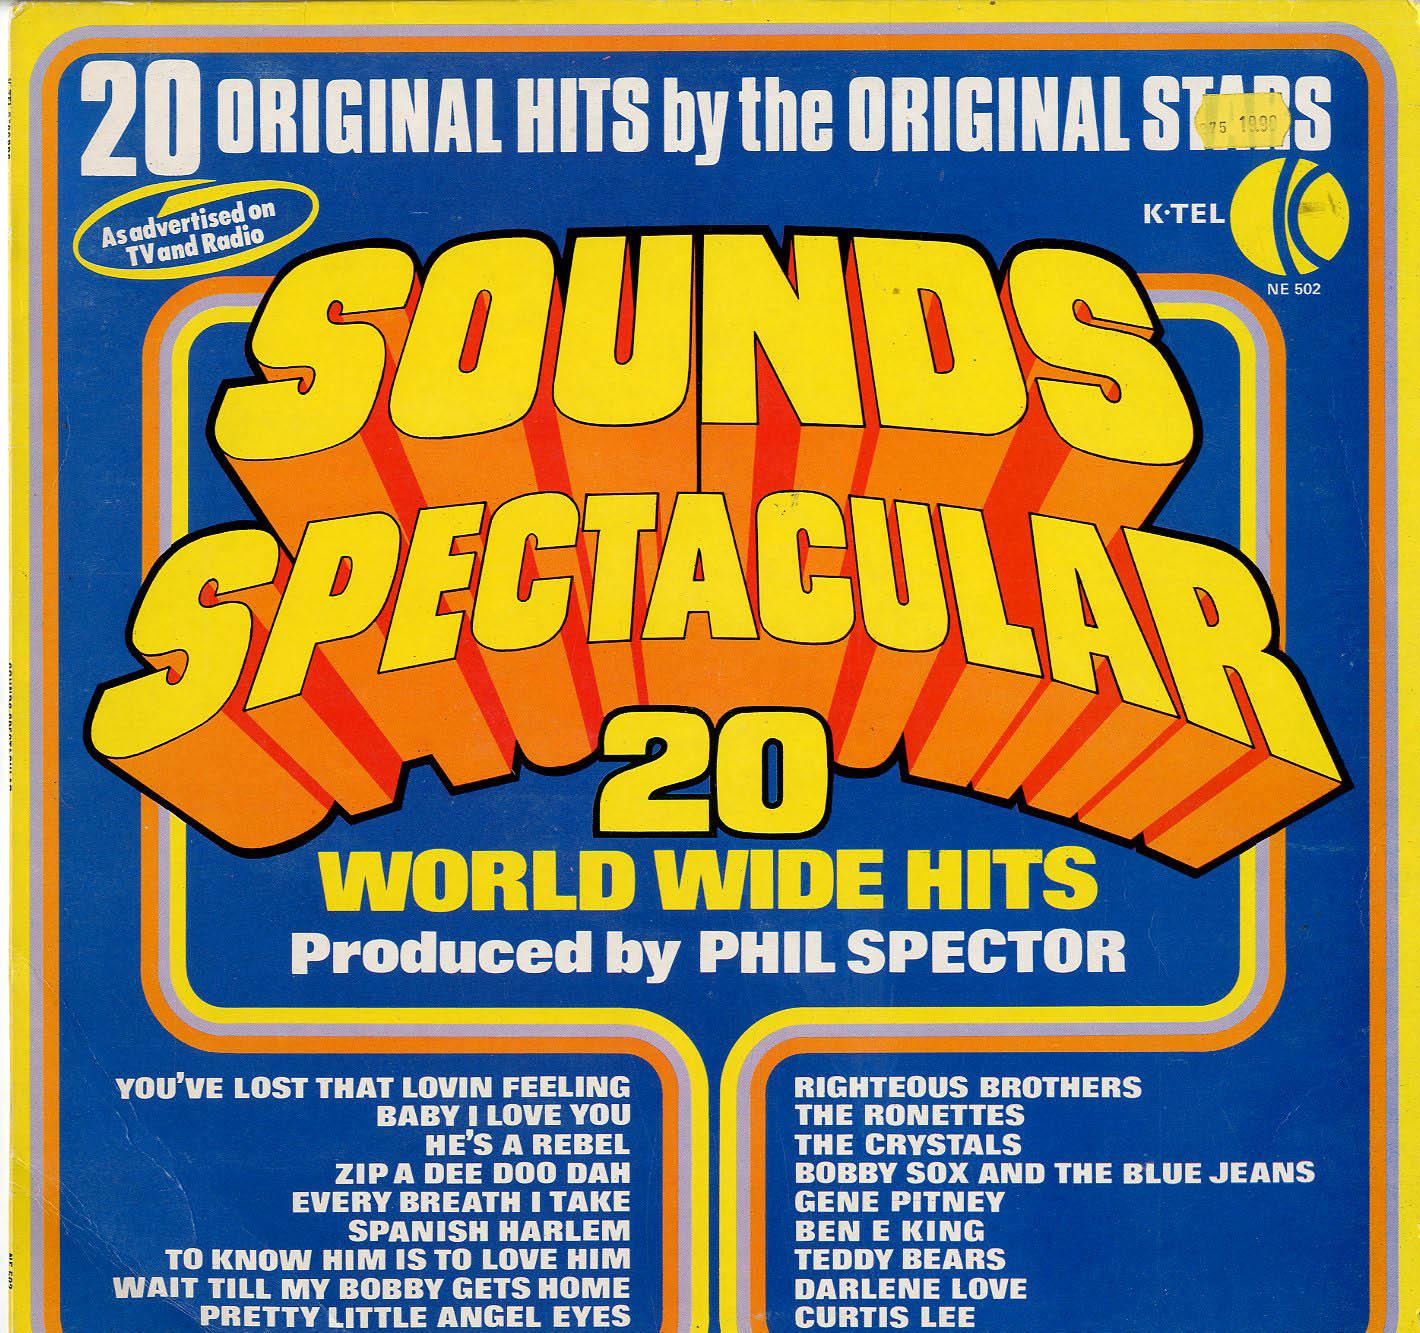 Albumcover Phil Spector Sampler - Sounds Spectactular - 20 World Hits Produced by Phil Spector 